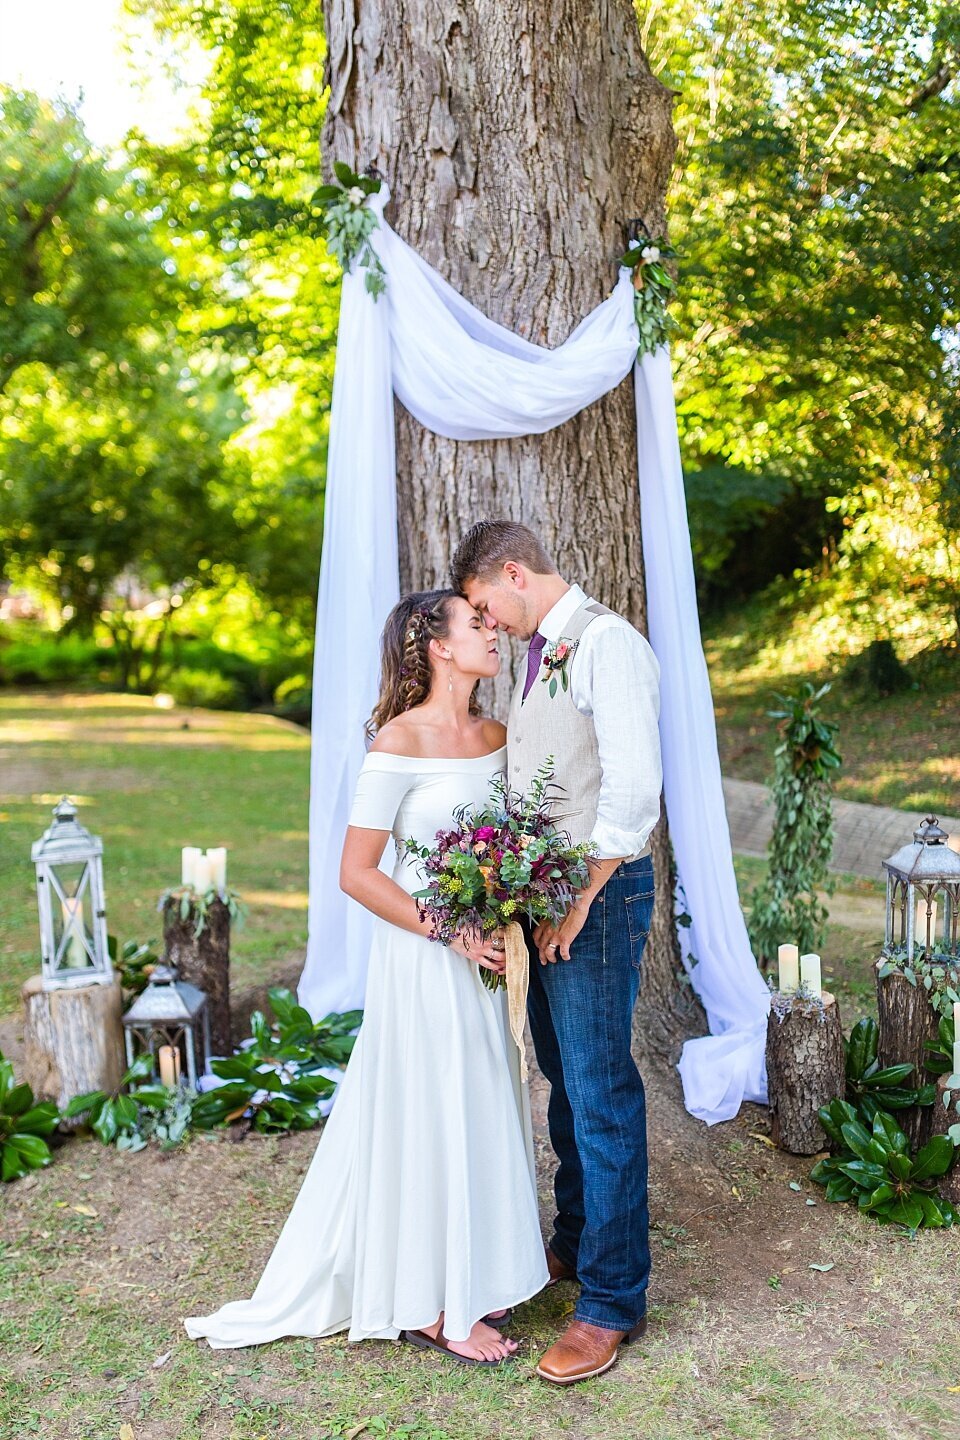 Bride and groom touch foreheads in casual outdoor wedding in Greenville, South Carolina.